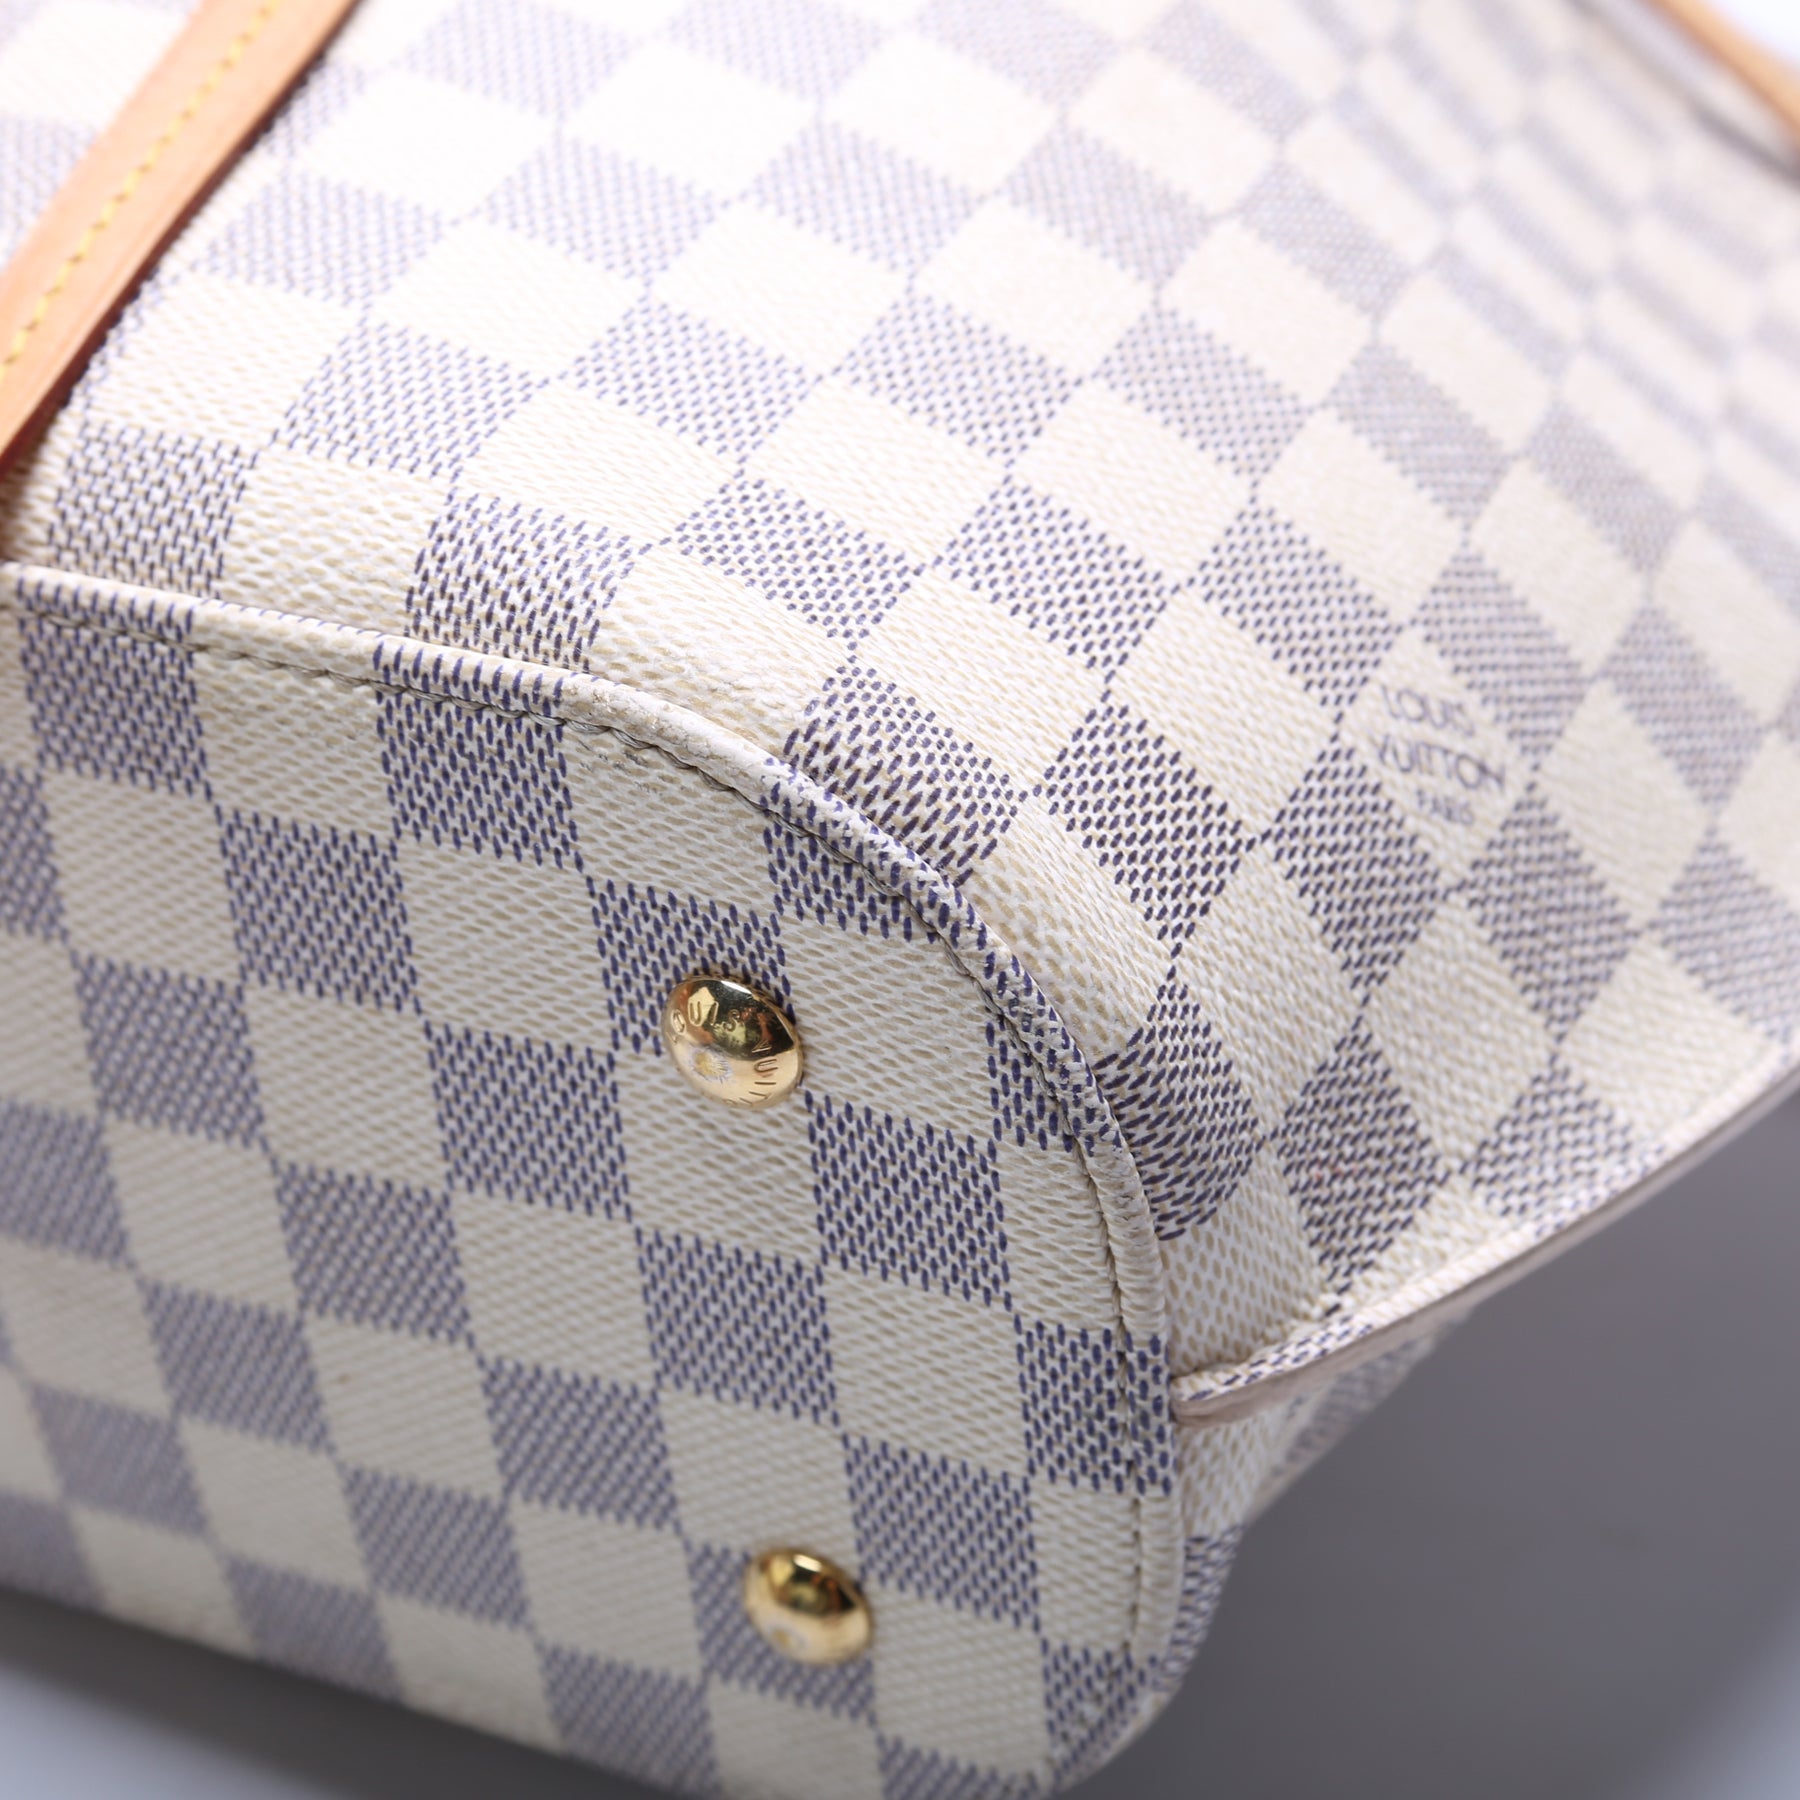 Louis Vuitton Damier Azur Coated Canvas Girolata Gold Hardware, 2016  Available For Immediate Sale At Sotheby's